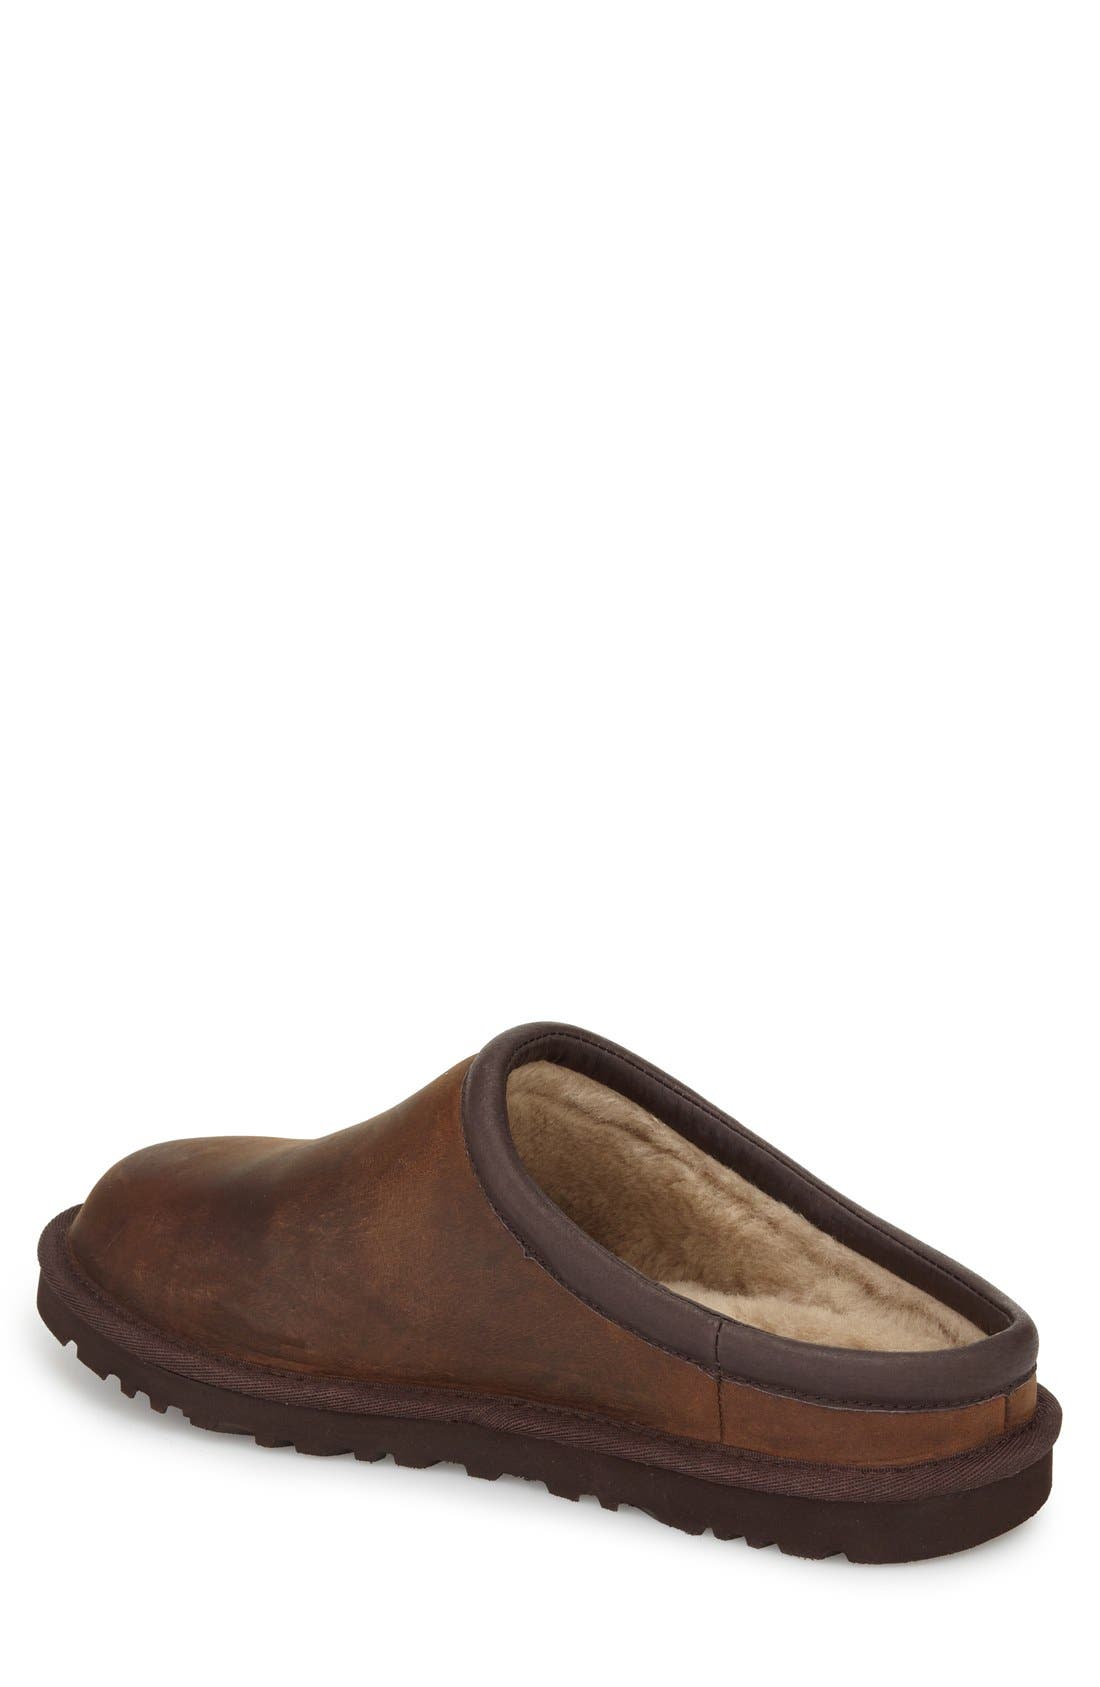 classic uggpure faux shearling lined clog